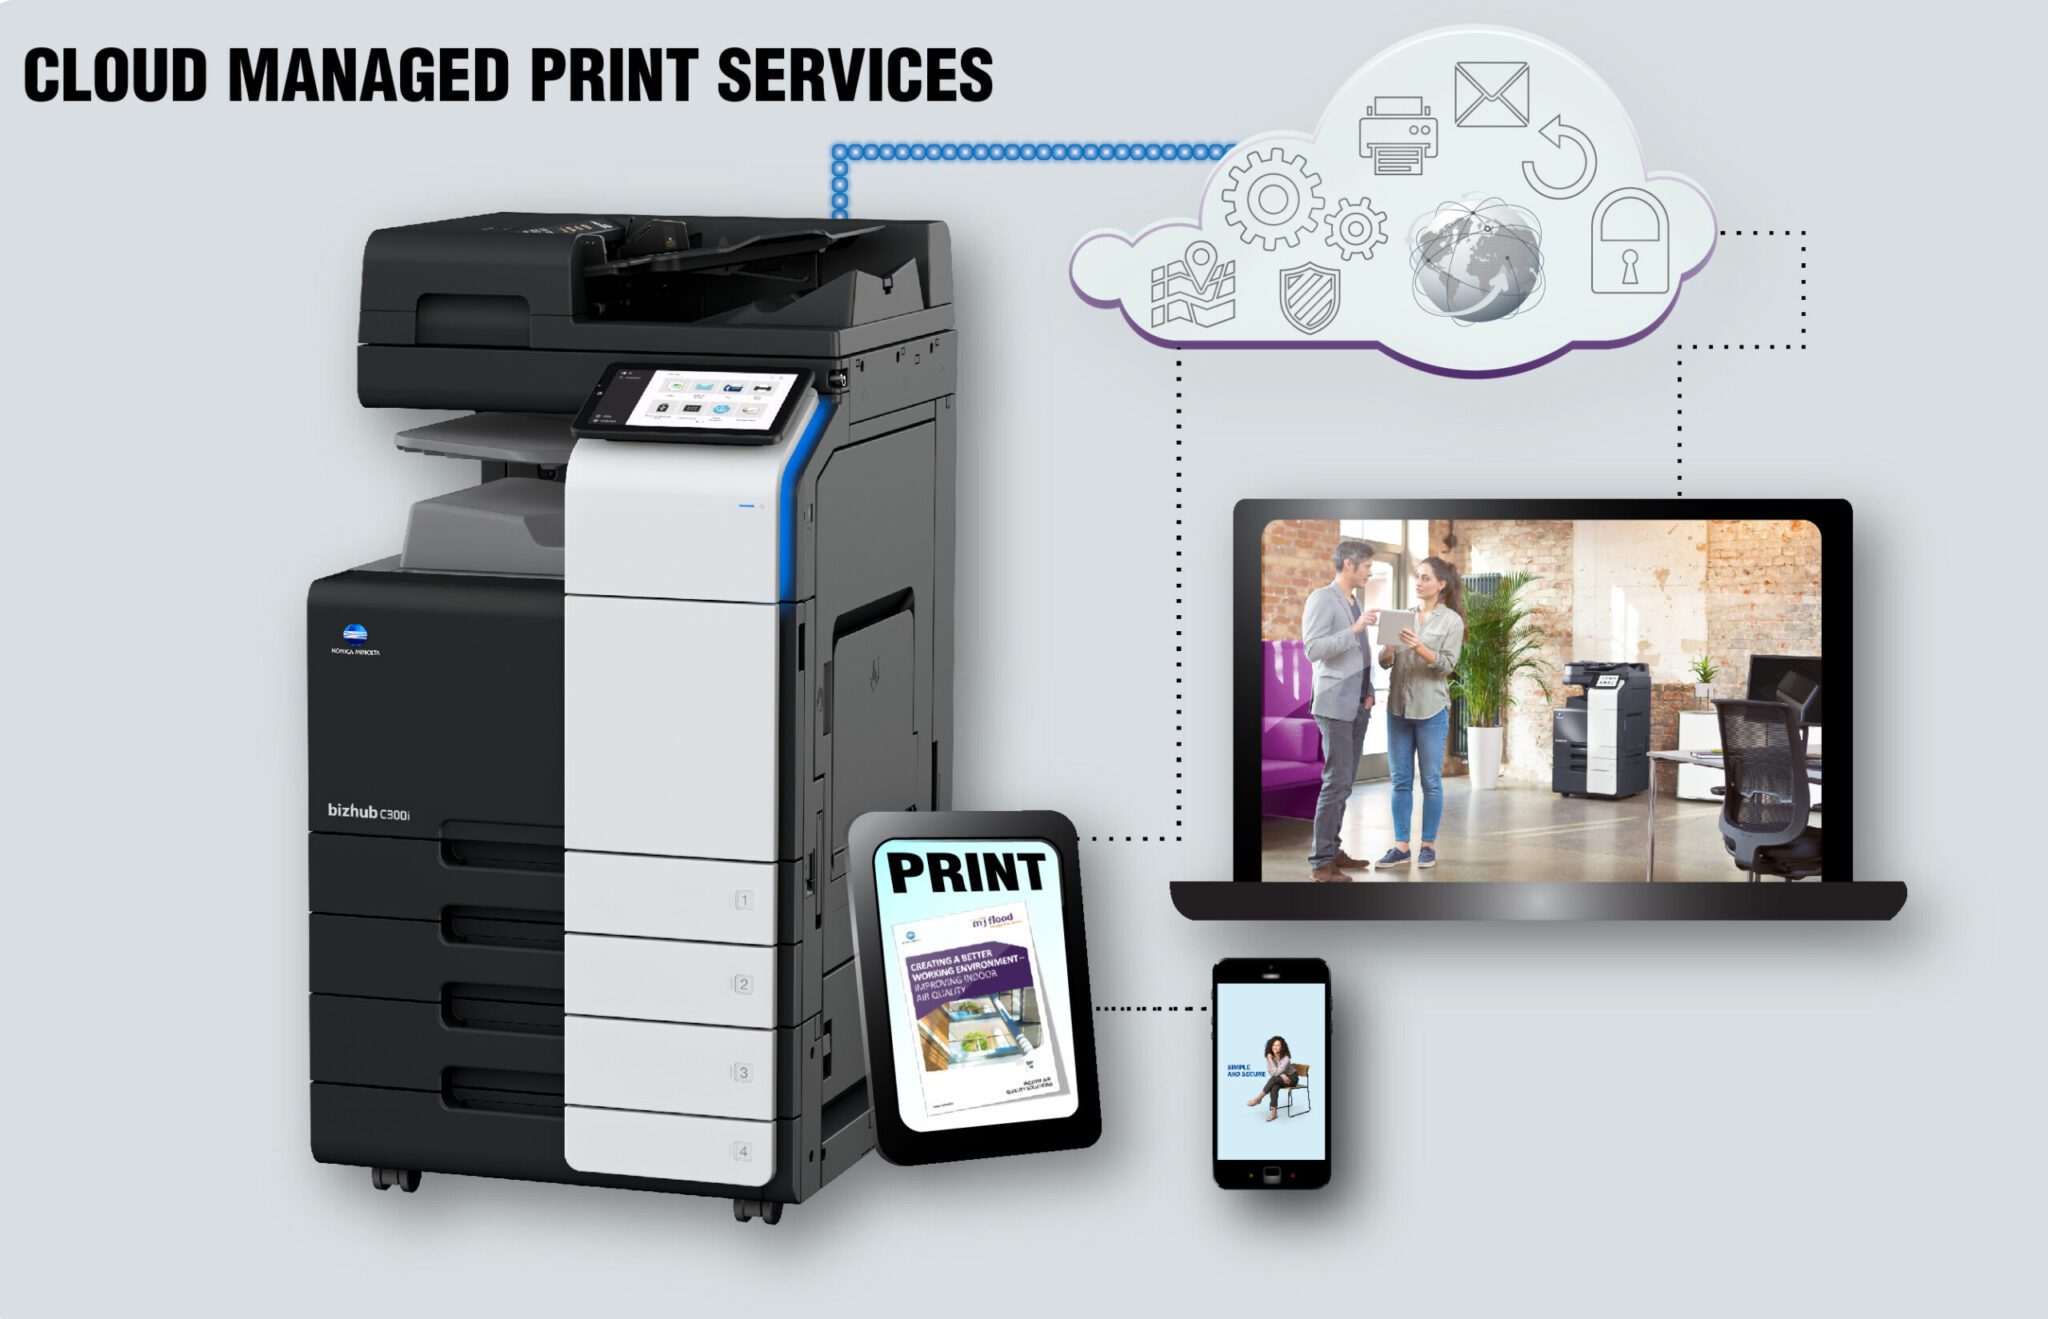 Cloud Managed Print Services